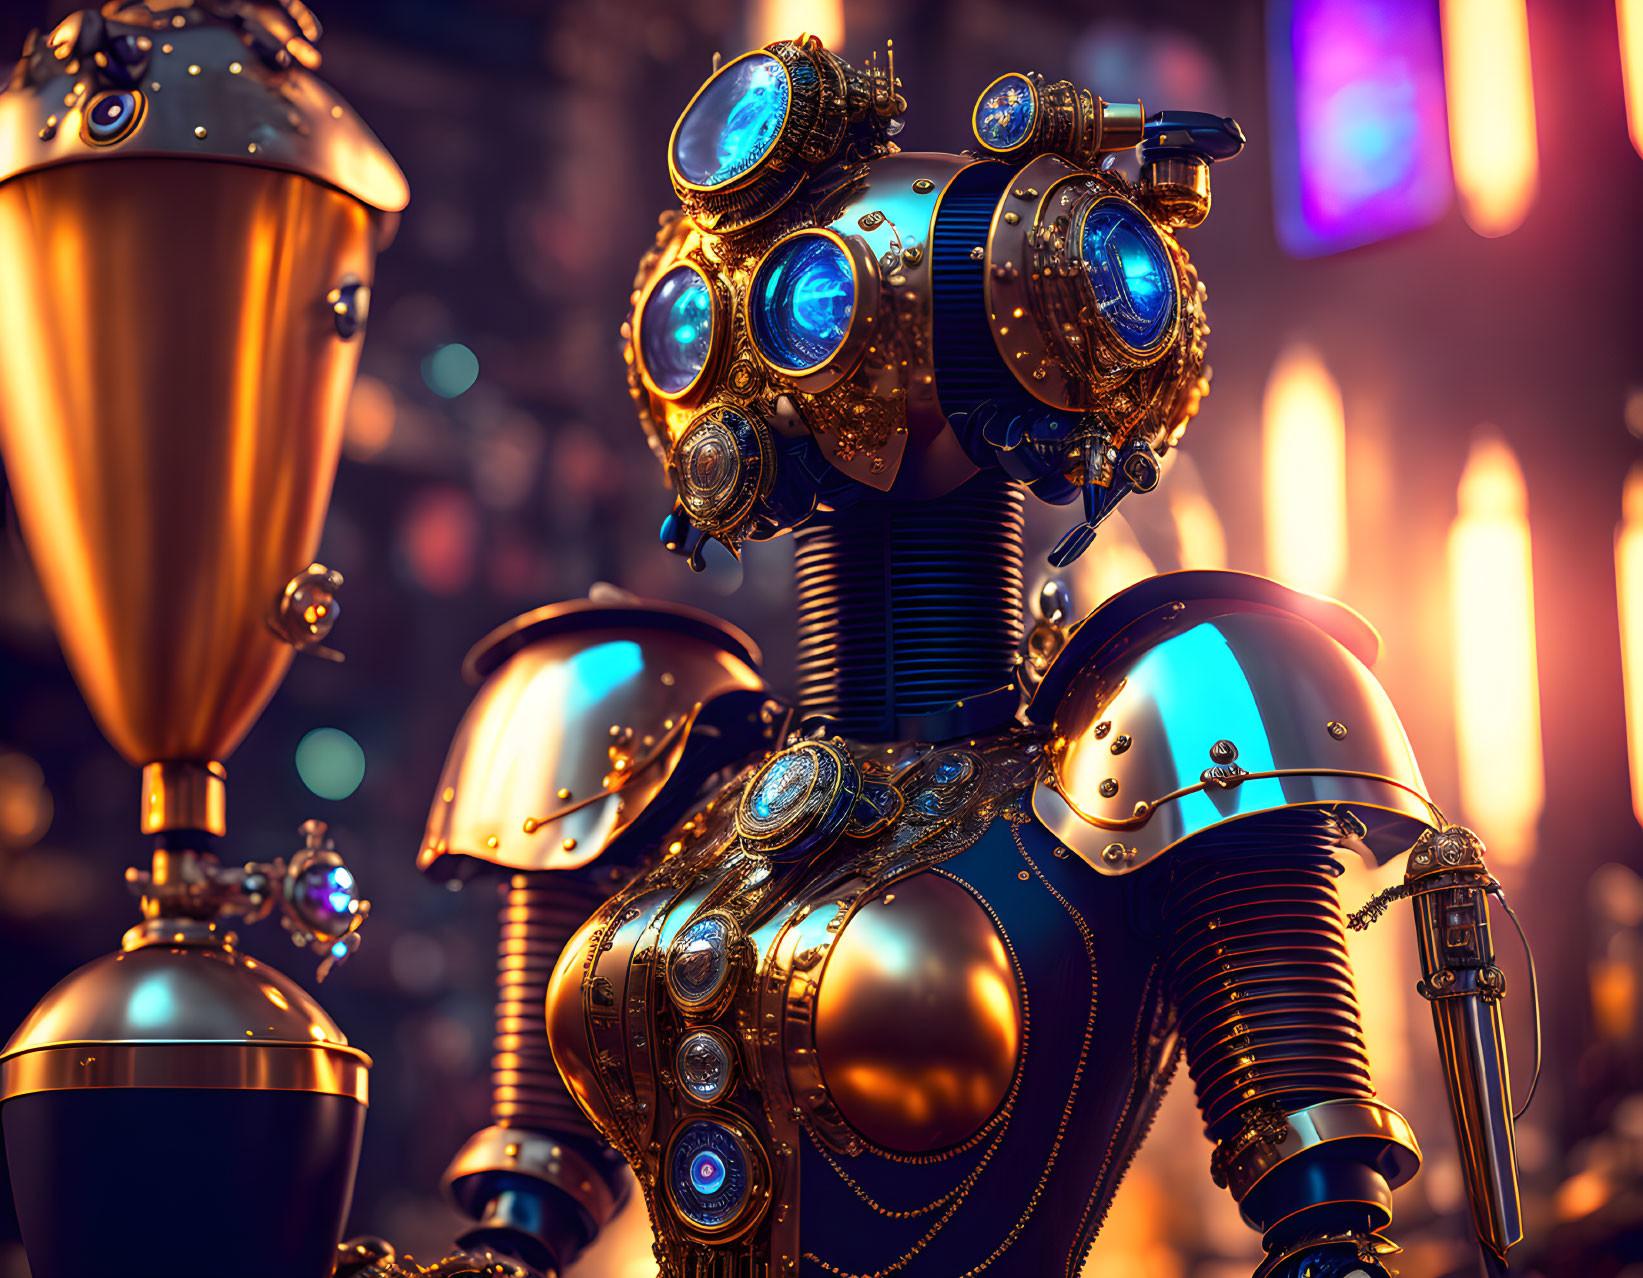 Detailed Ornate Brass Robot with Glowing Blue Lights